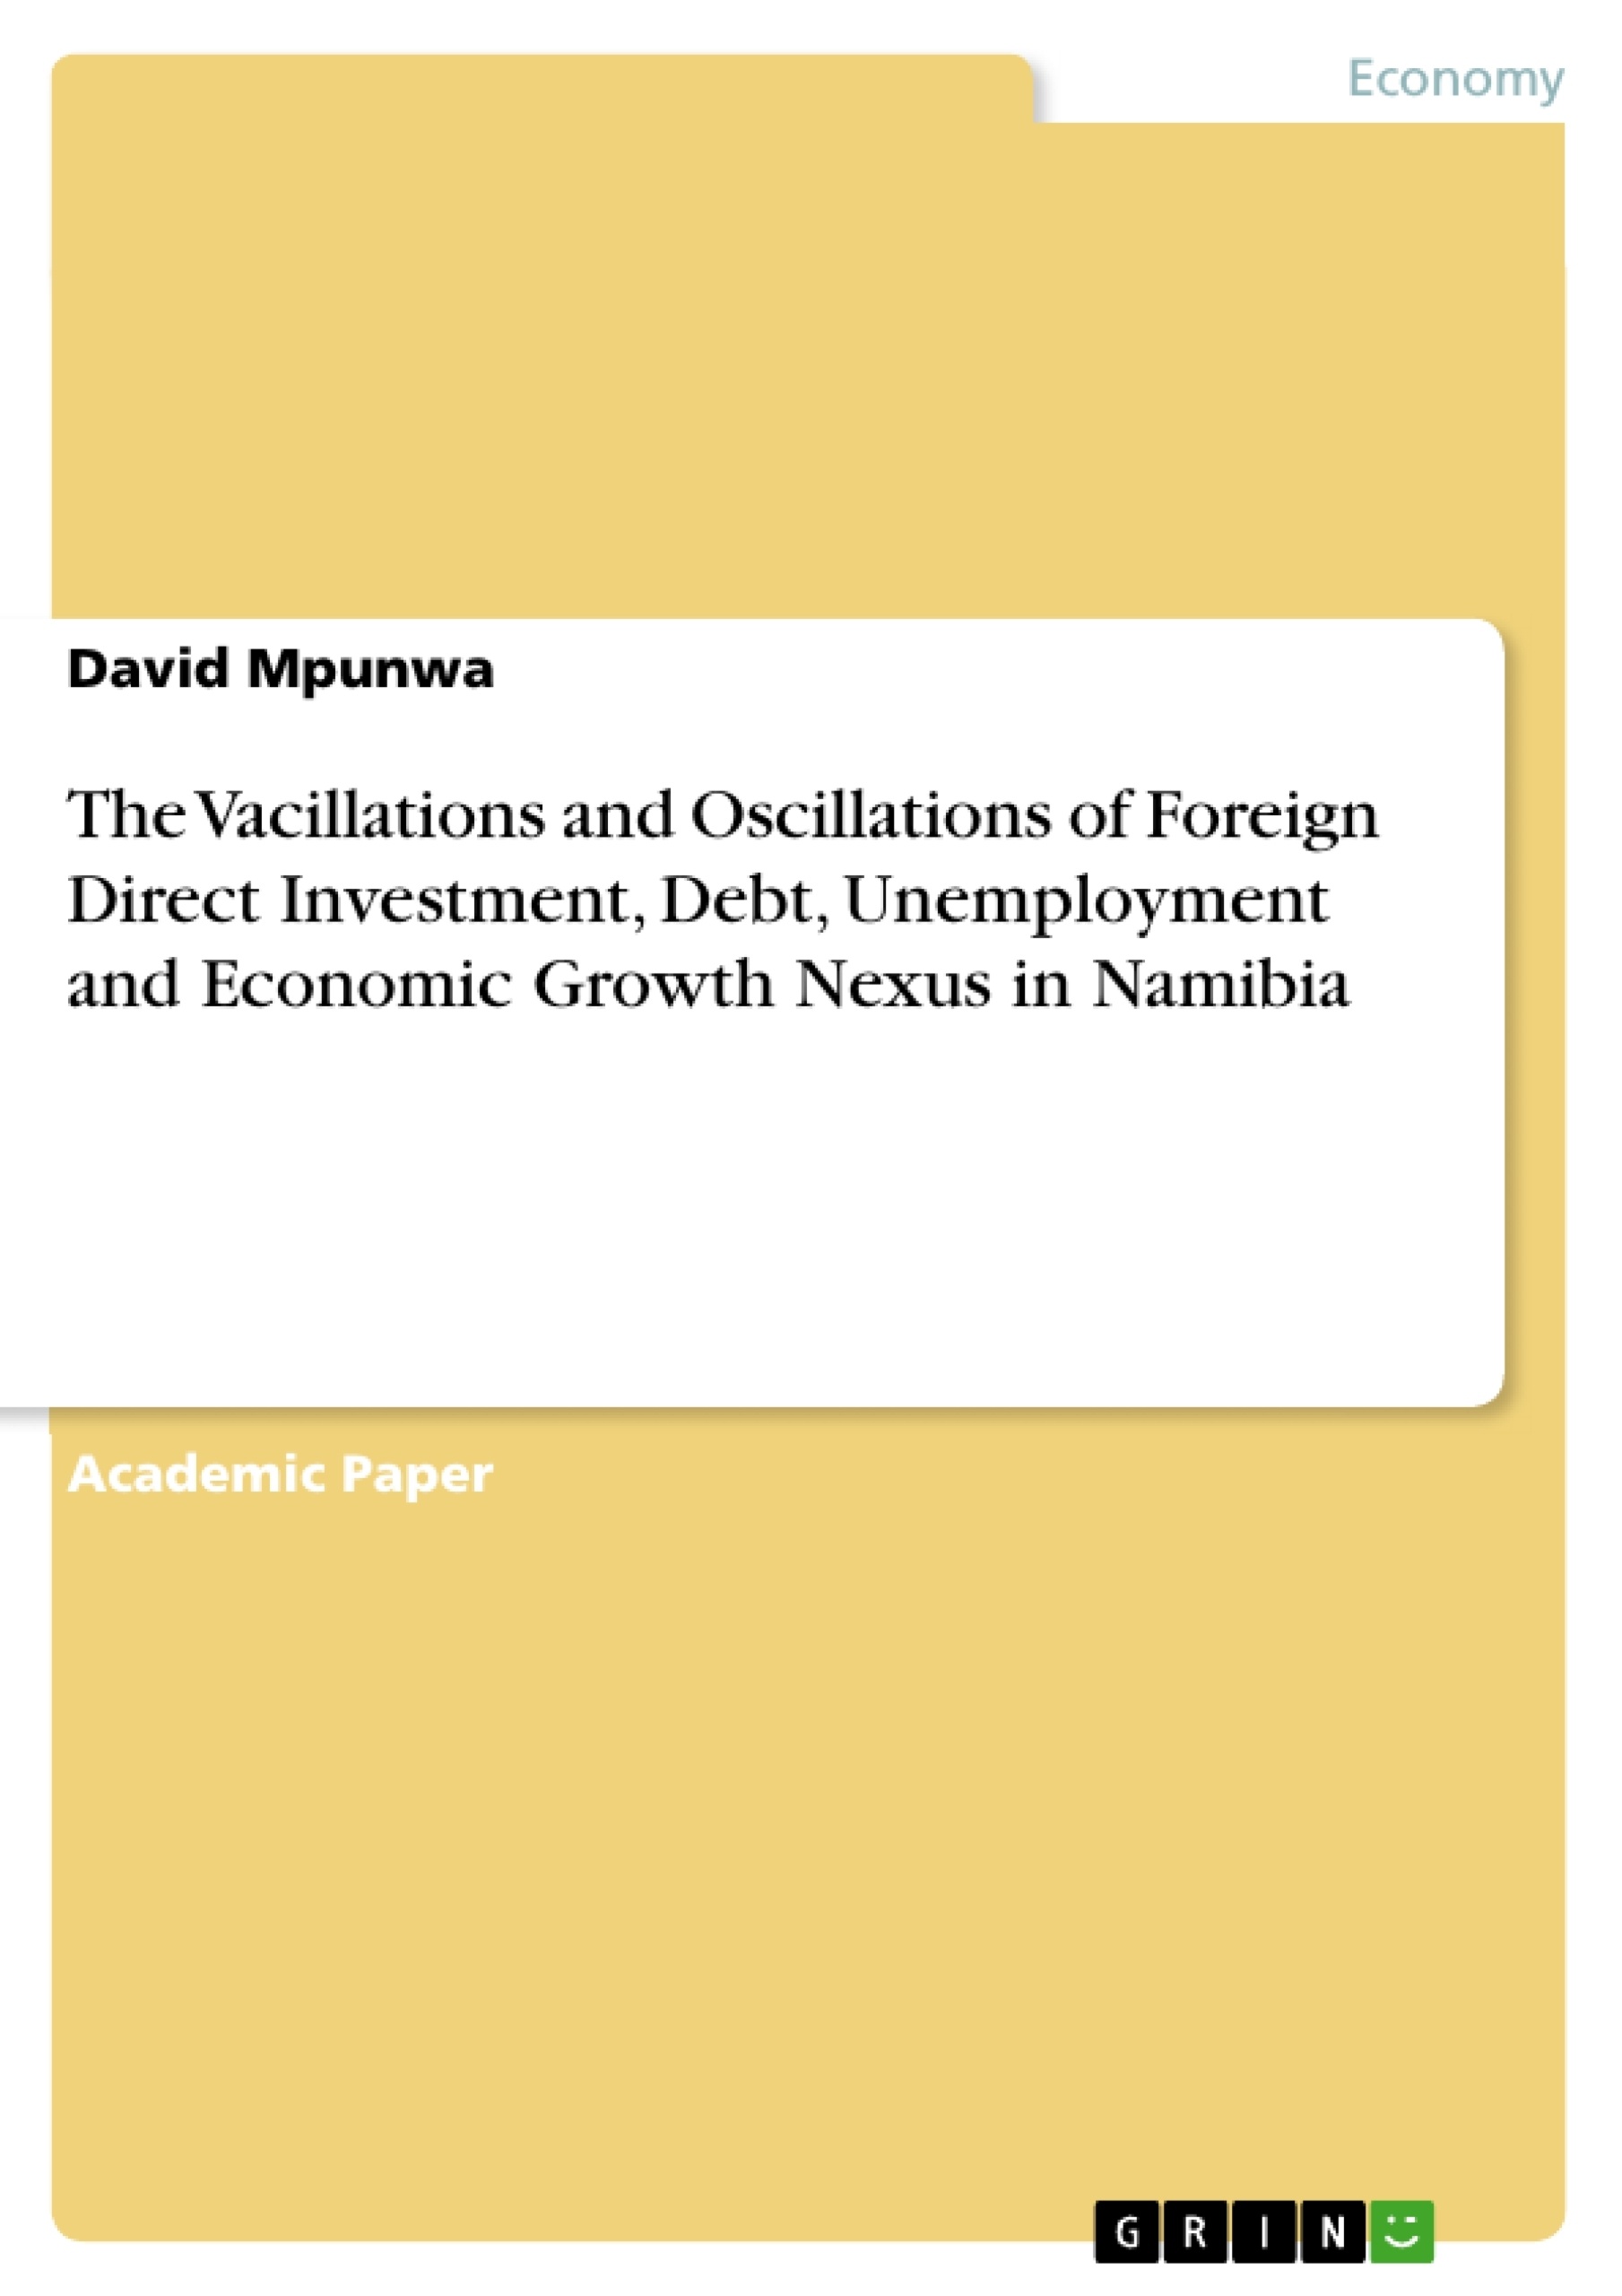 Title: The Vacillations and Oscillations of Foreign Direct Investment, Debt, Unemployment and Economic Growth Nexus in Namibia